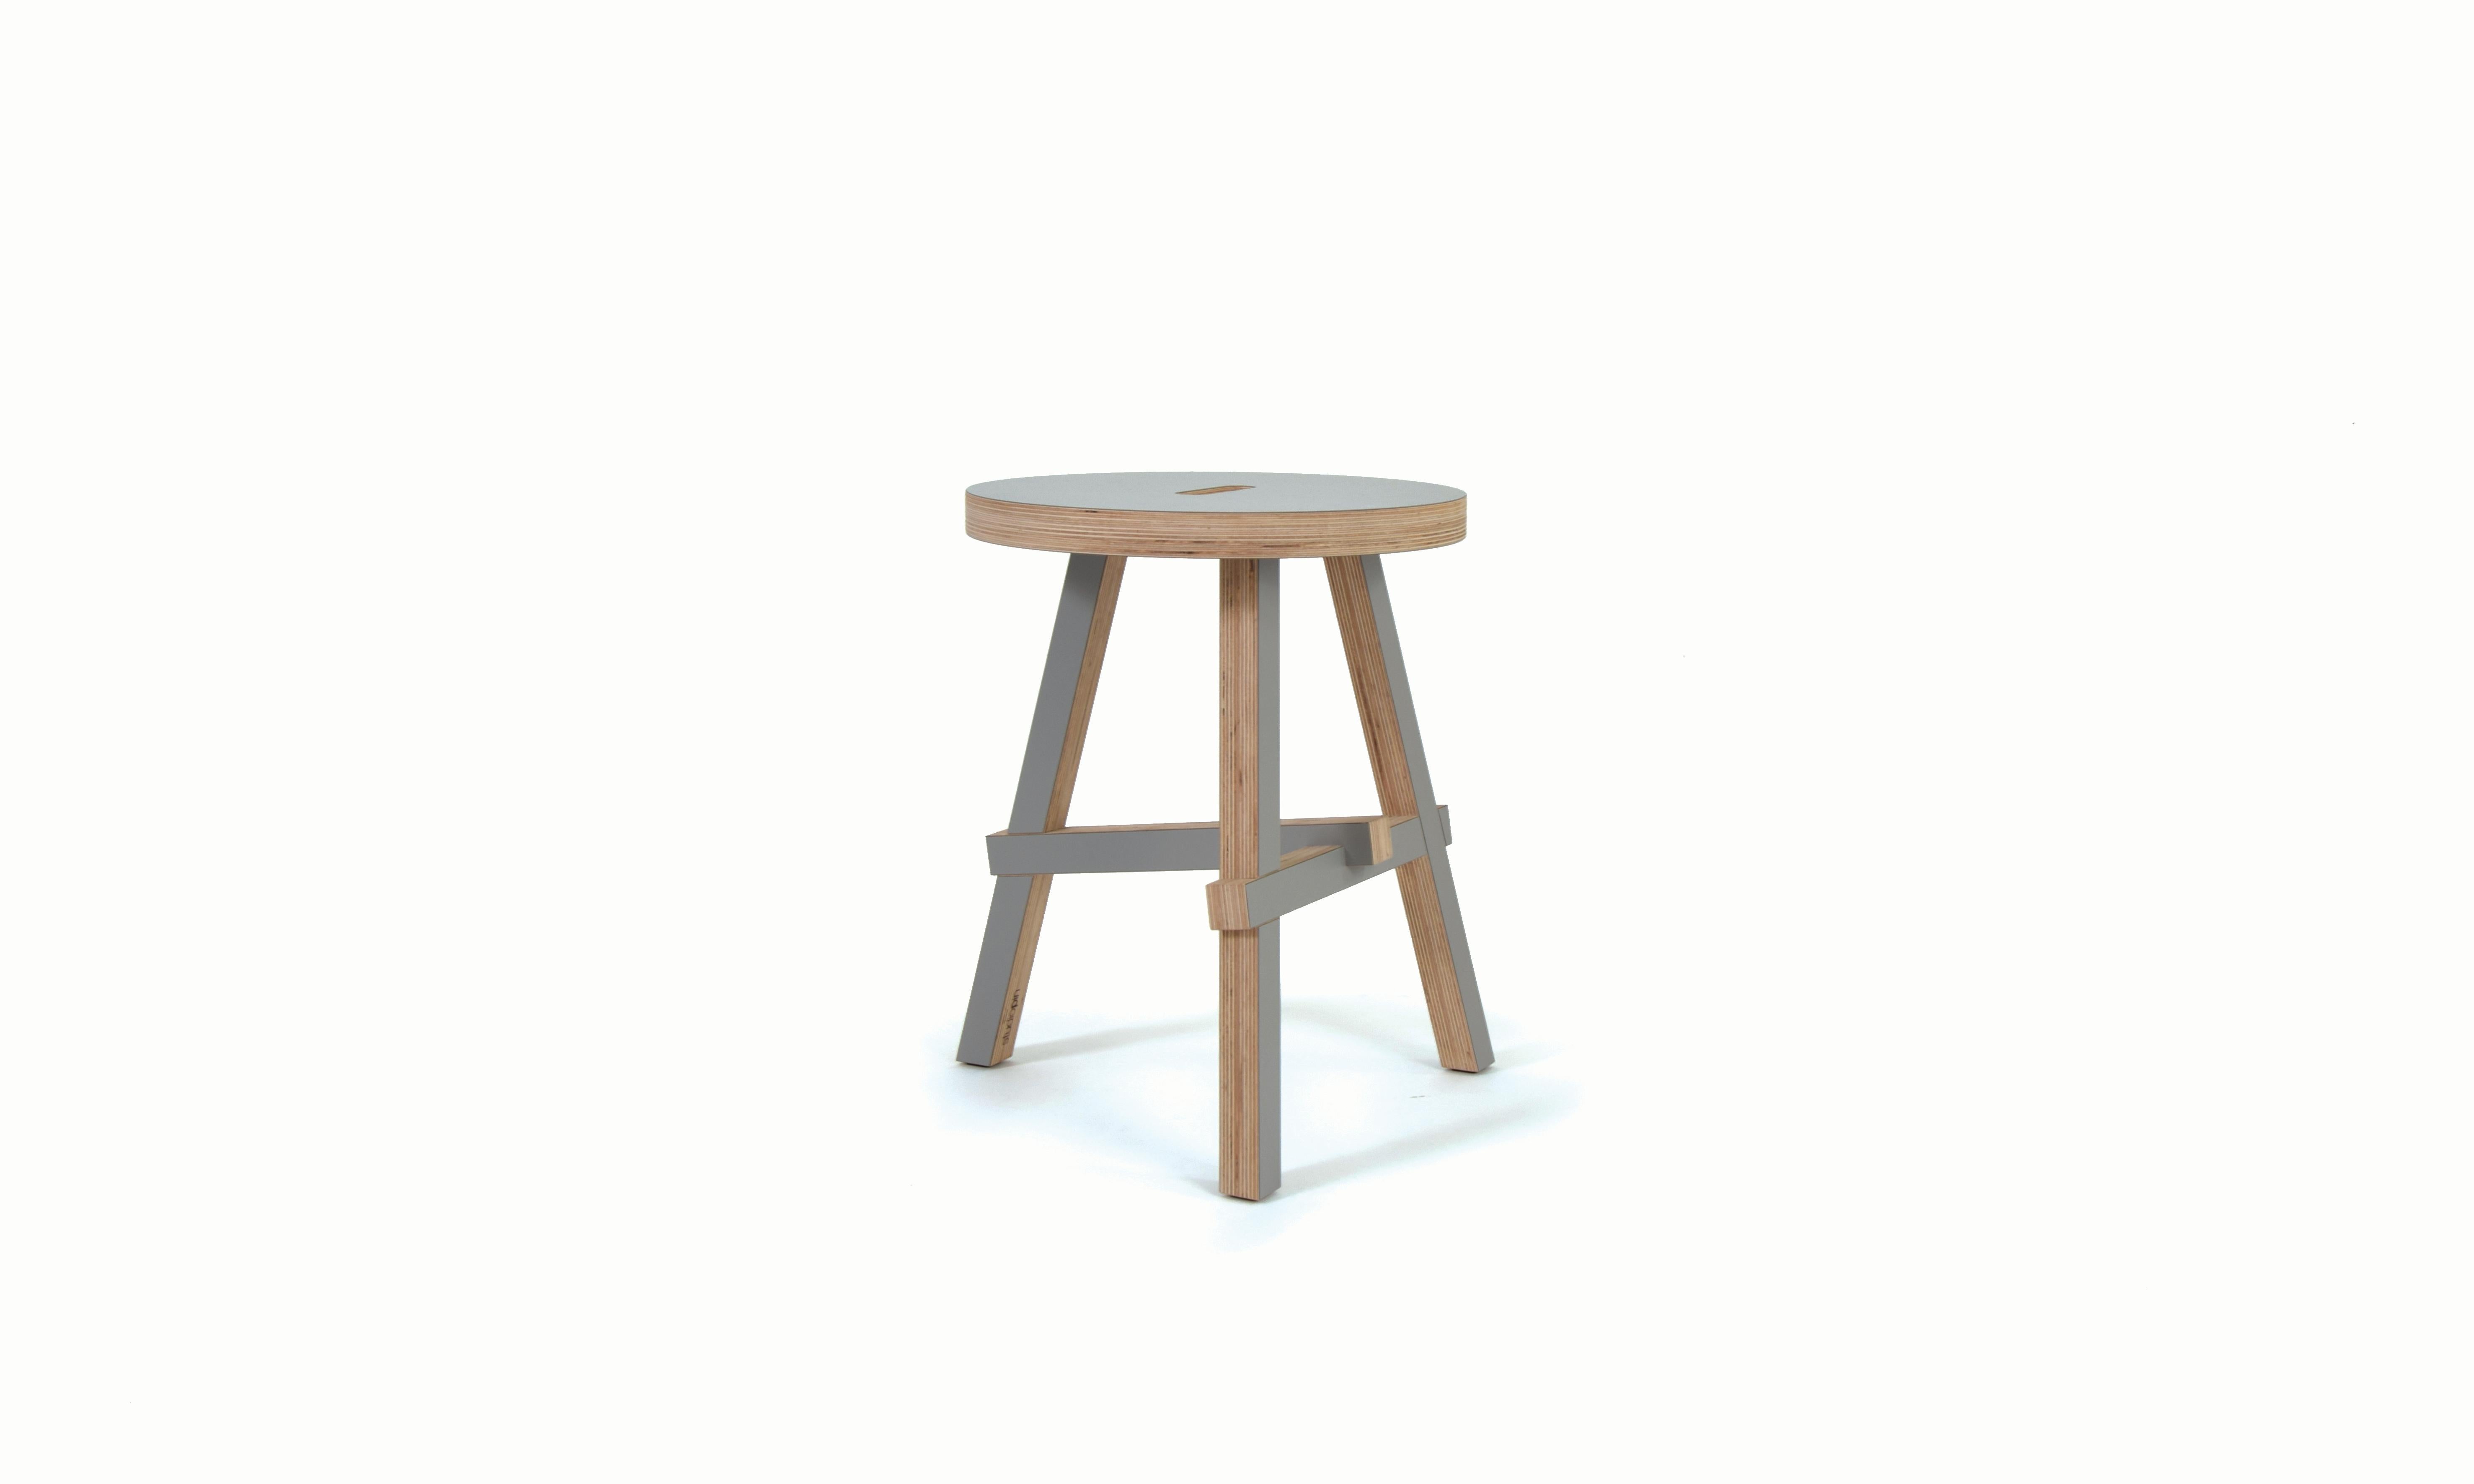 Coin slot Gulden stool by Studio Pin.
Dimensions: D 36 x W 36 x H 45 cm.
Materials: HPL, birch plywood: manhattan grey.

A hike back to “the good old days”. In times of economic instability, people like to go back to the time when everything